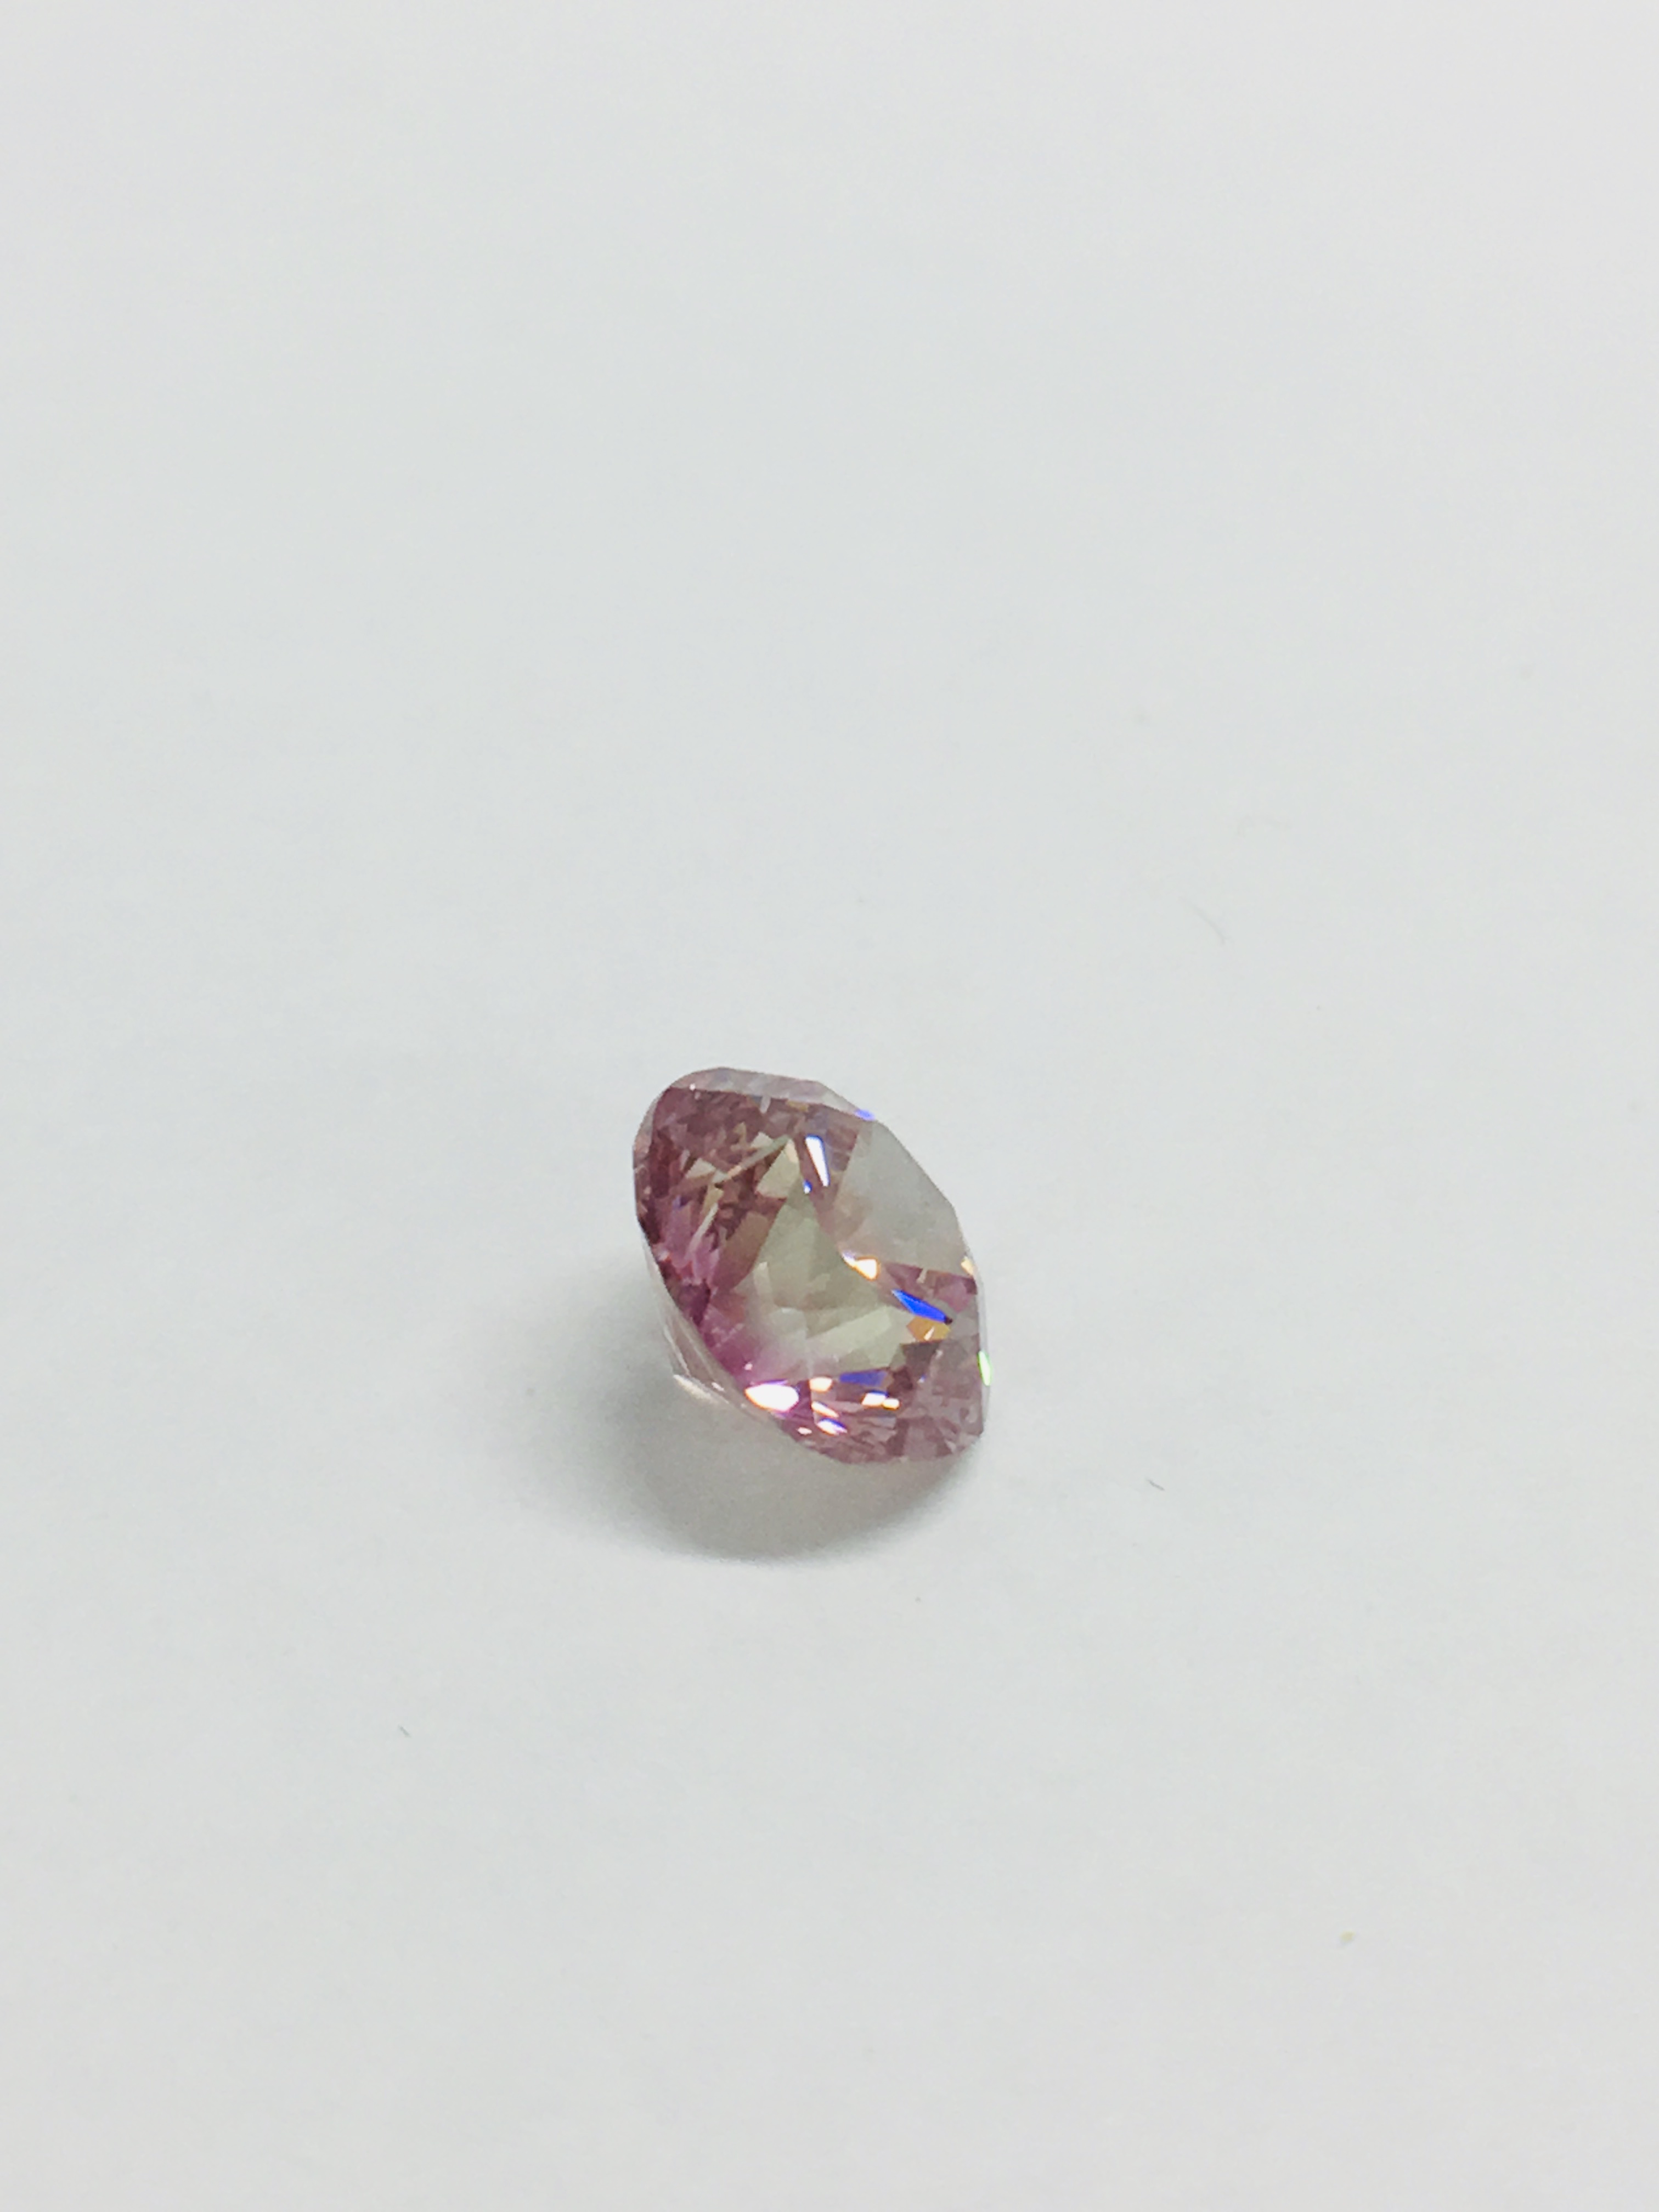 2.04ct Pink Brilliant cut Natural Diamond,GIA certification 6173645004 - Image 4 of 5